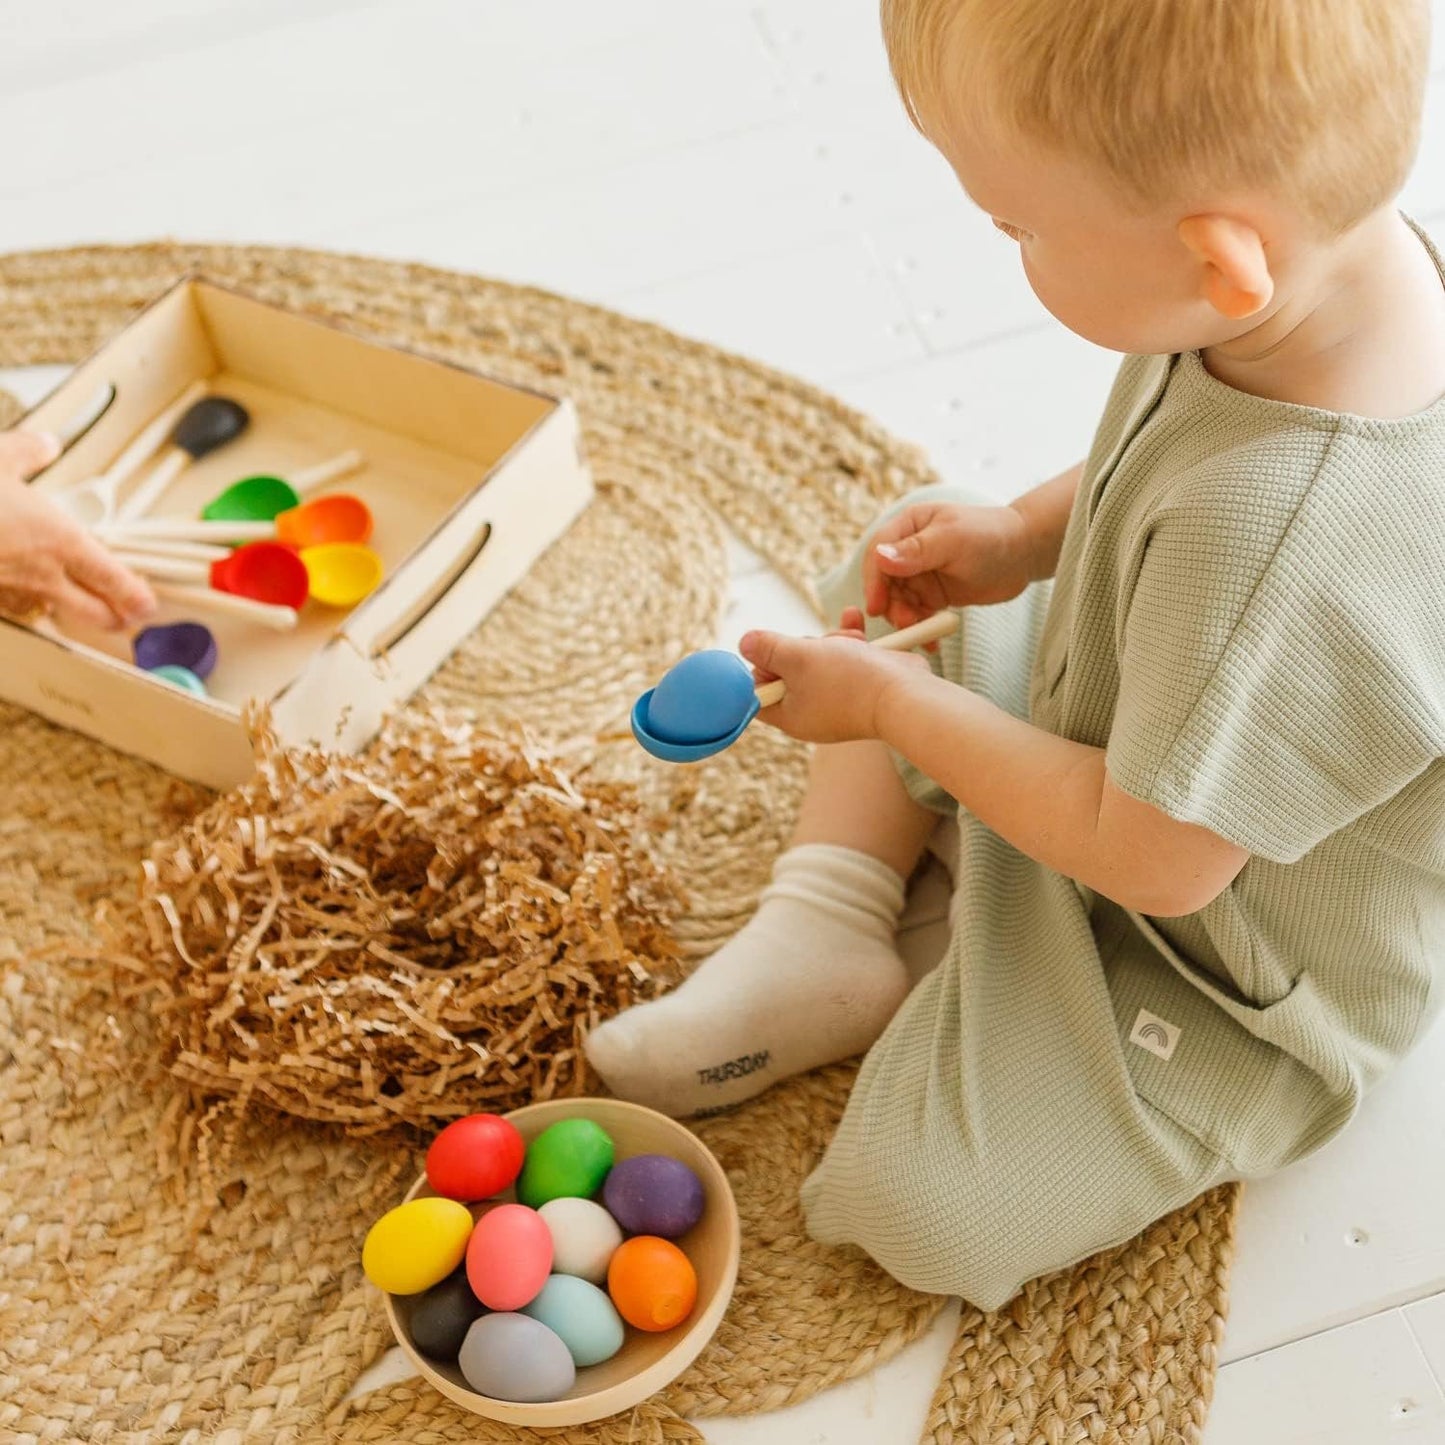 Ulanik Eggs and Spoons Toddler Montessori Toys for 1+ Wooden Eggs Matching Game for Learning Color Sorting and Counting